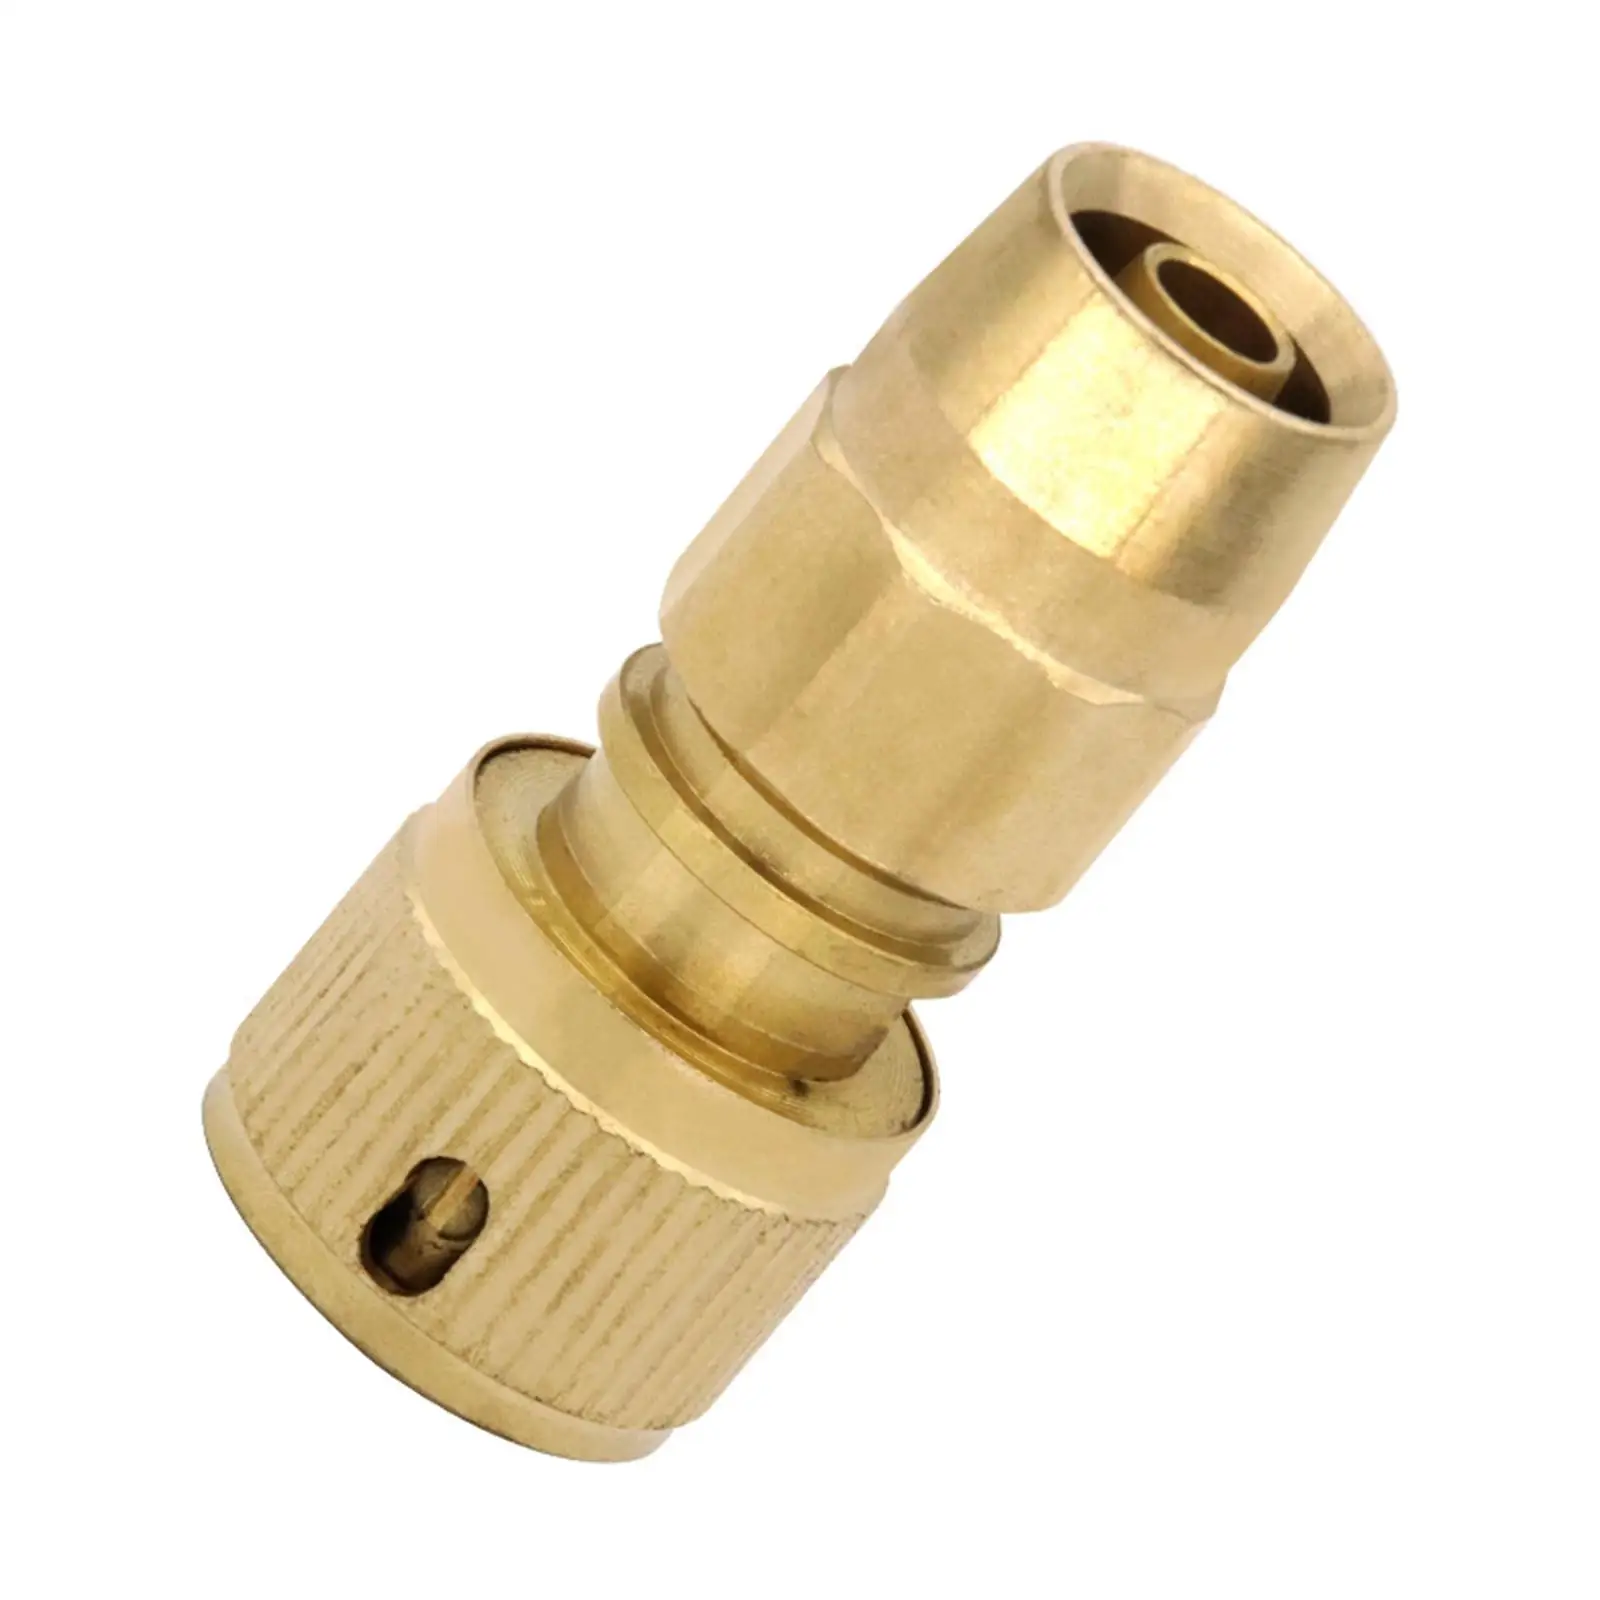 3x Brass Expandable Hose Repair Adapter Accessories Quick Connect Hose Joint Male Pipe Adapter Hose Connectors